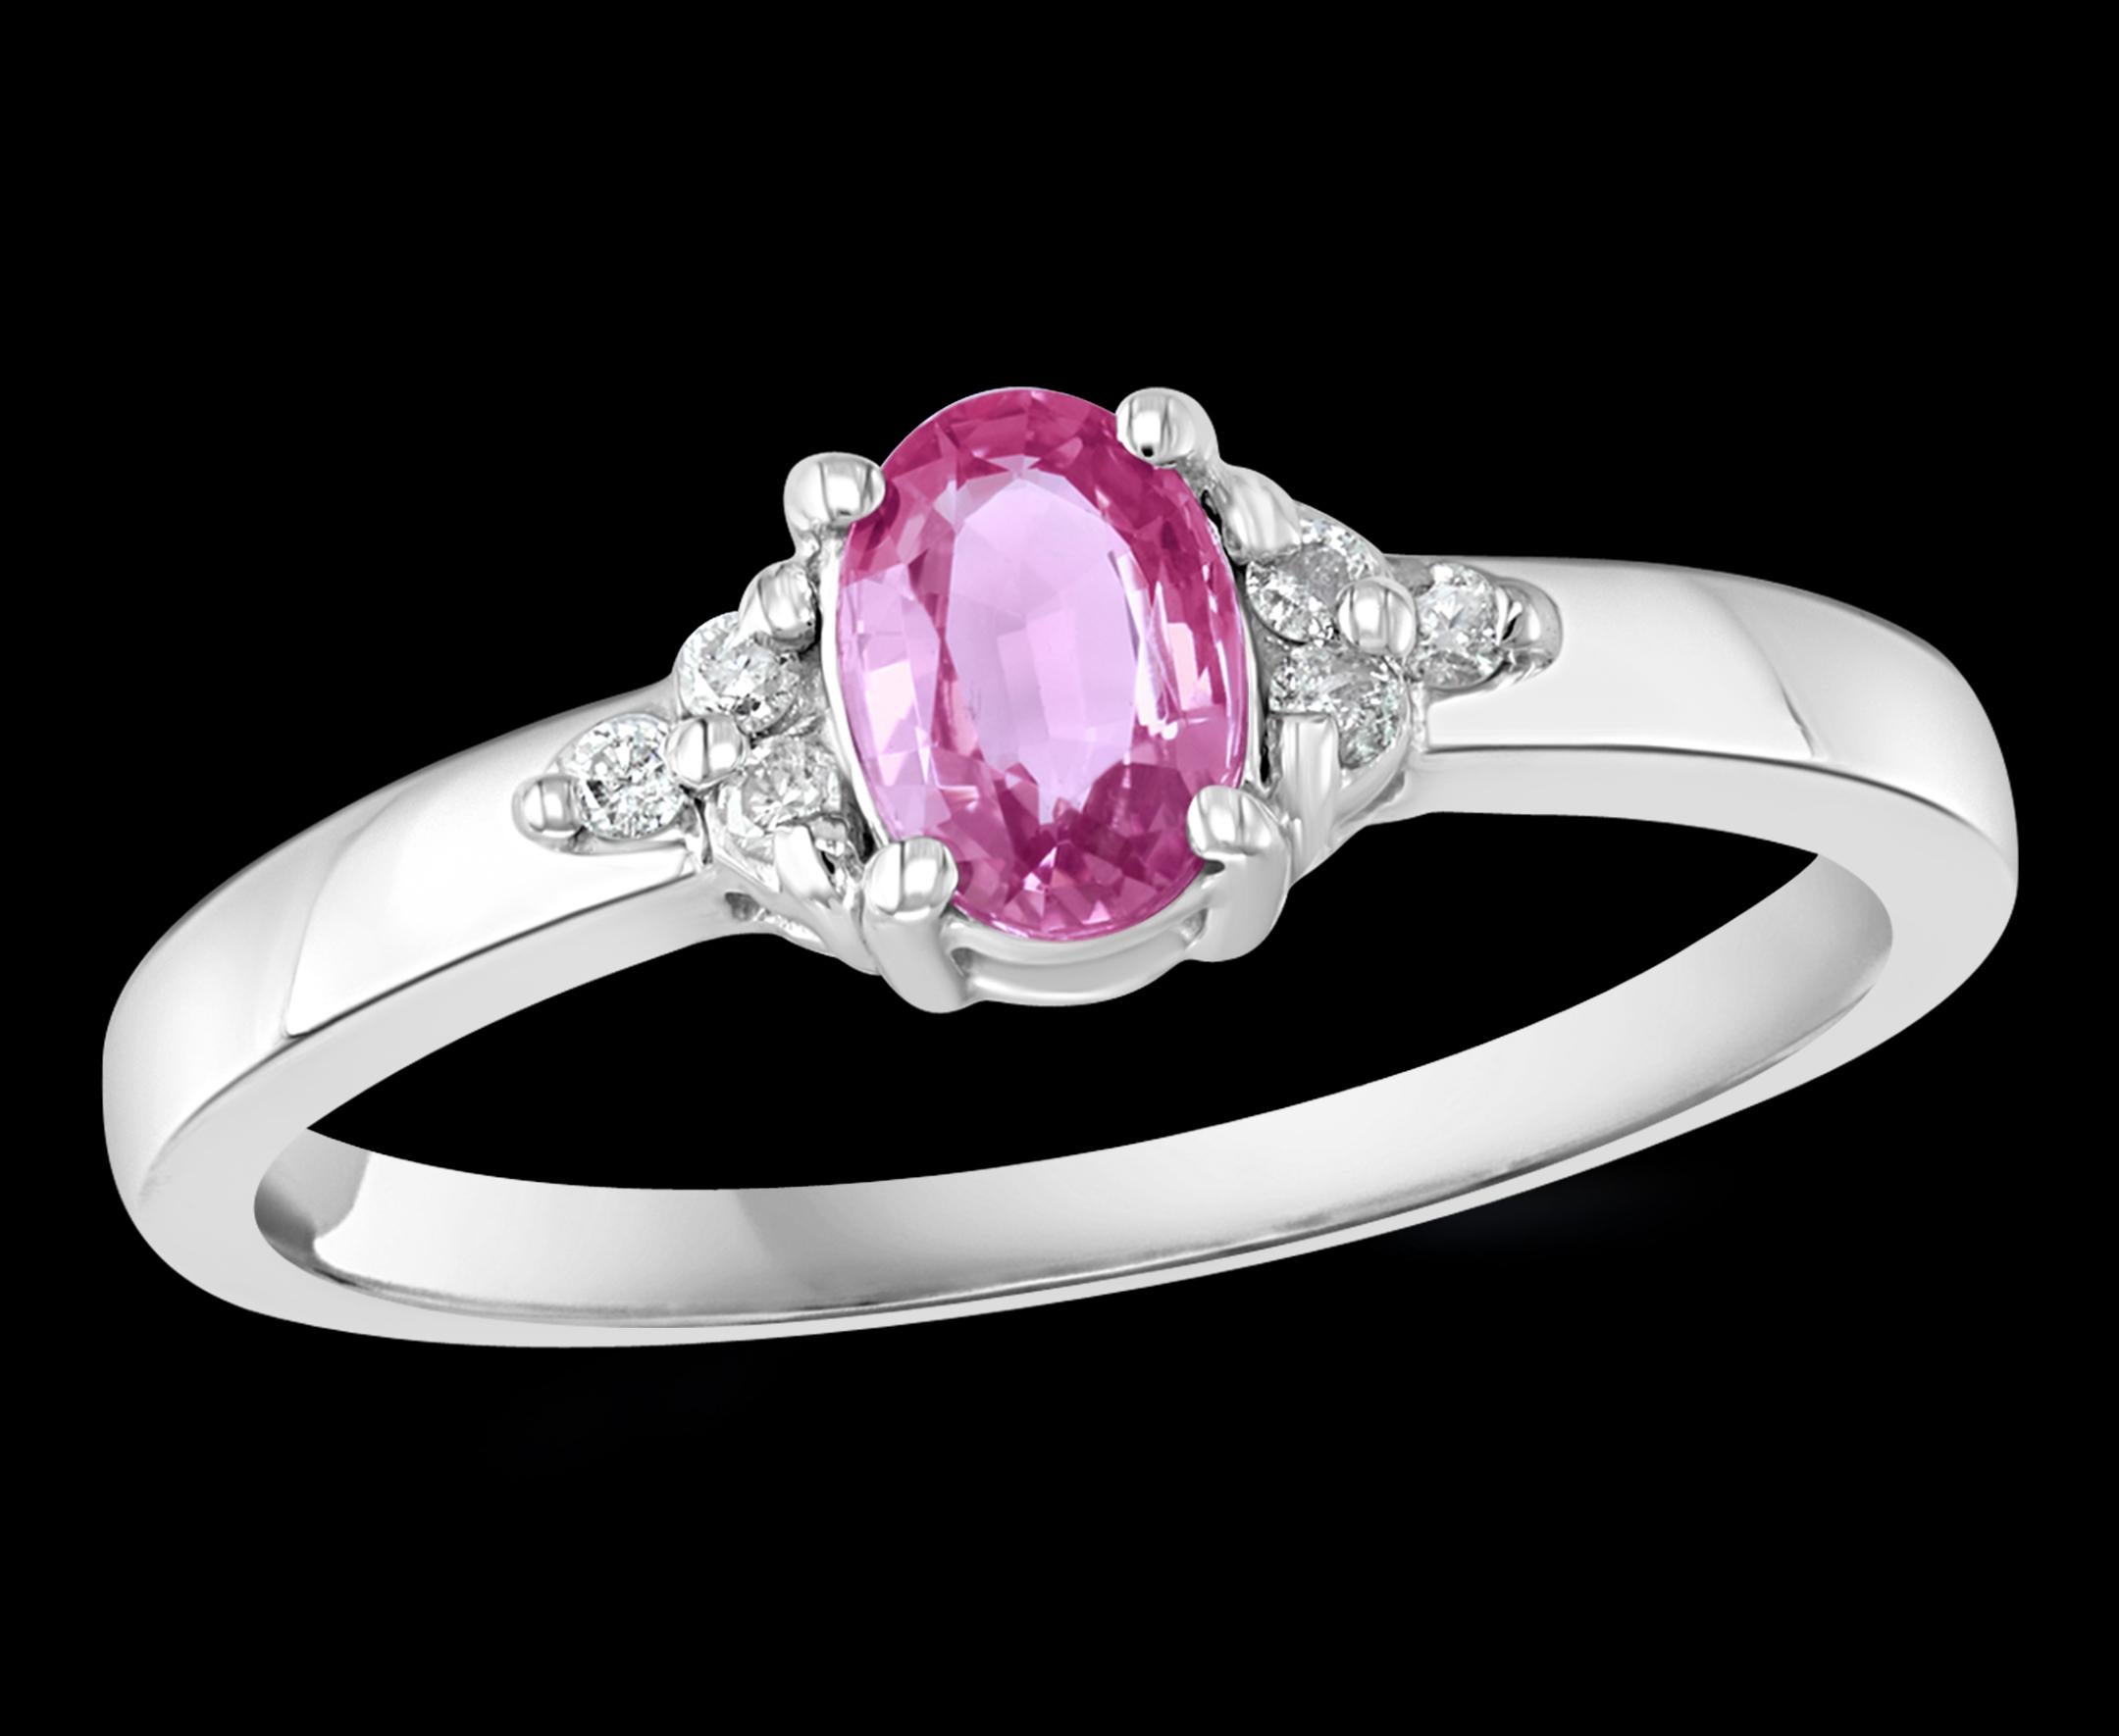 A classic, Ring 
Approximately 0.25  Ct natural Pink sapphire and 6 Round   Diamond 14 Karat  White gold   Ring
Makes a nice gift for Pre Teen or Teen girls or even young adults.
 All round brilliant cut diamonds
14 Karat White  Gold: 2.1  Grams
